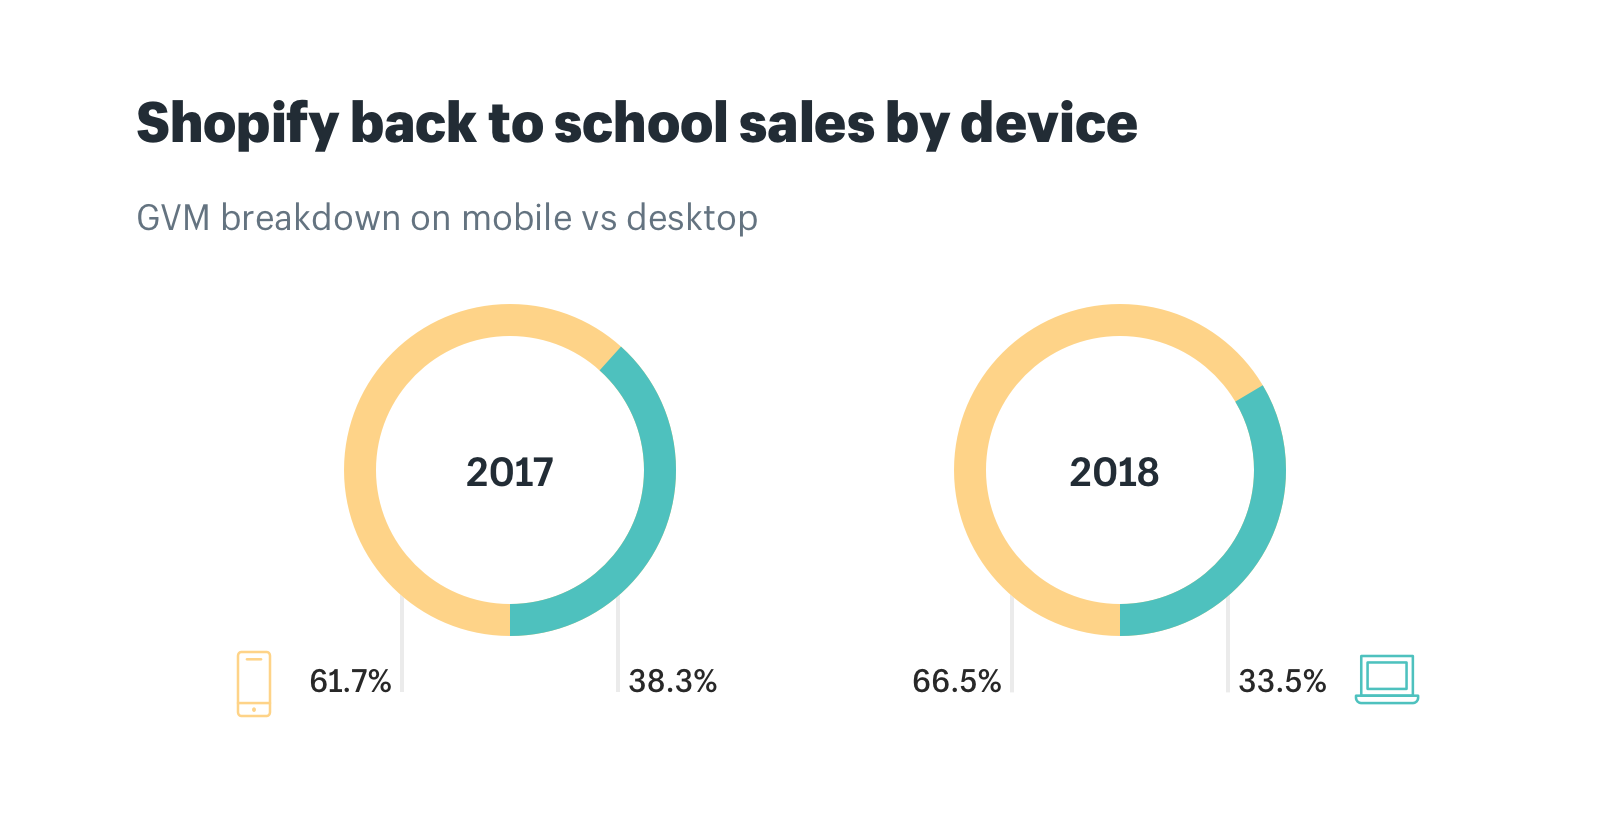 Shopify back to school sales by device